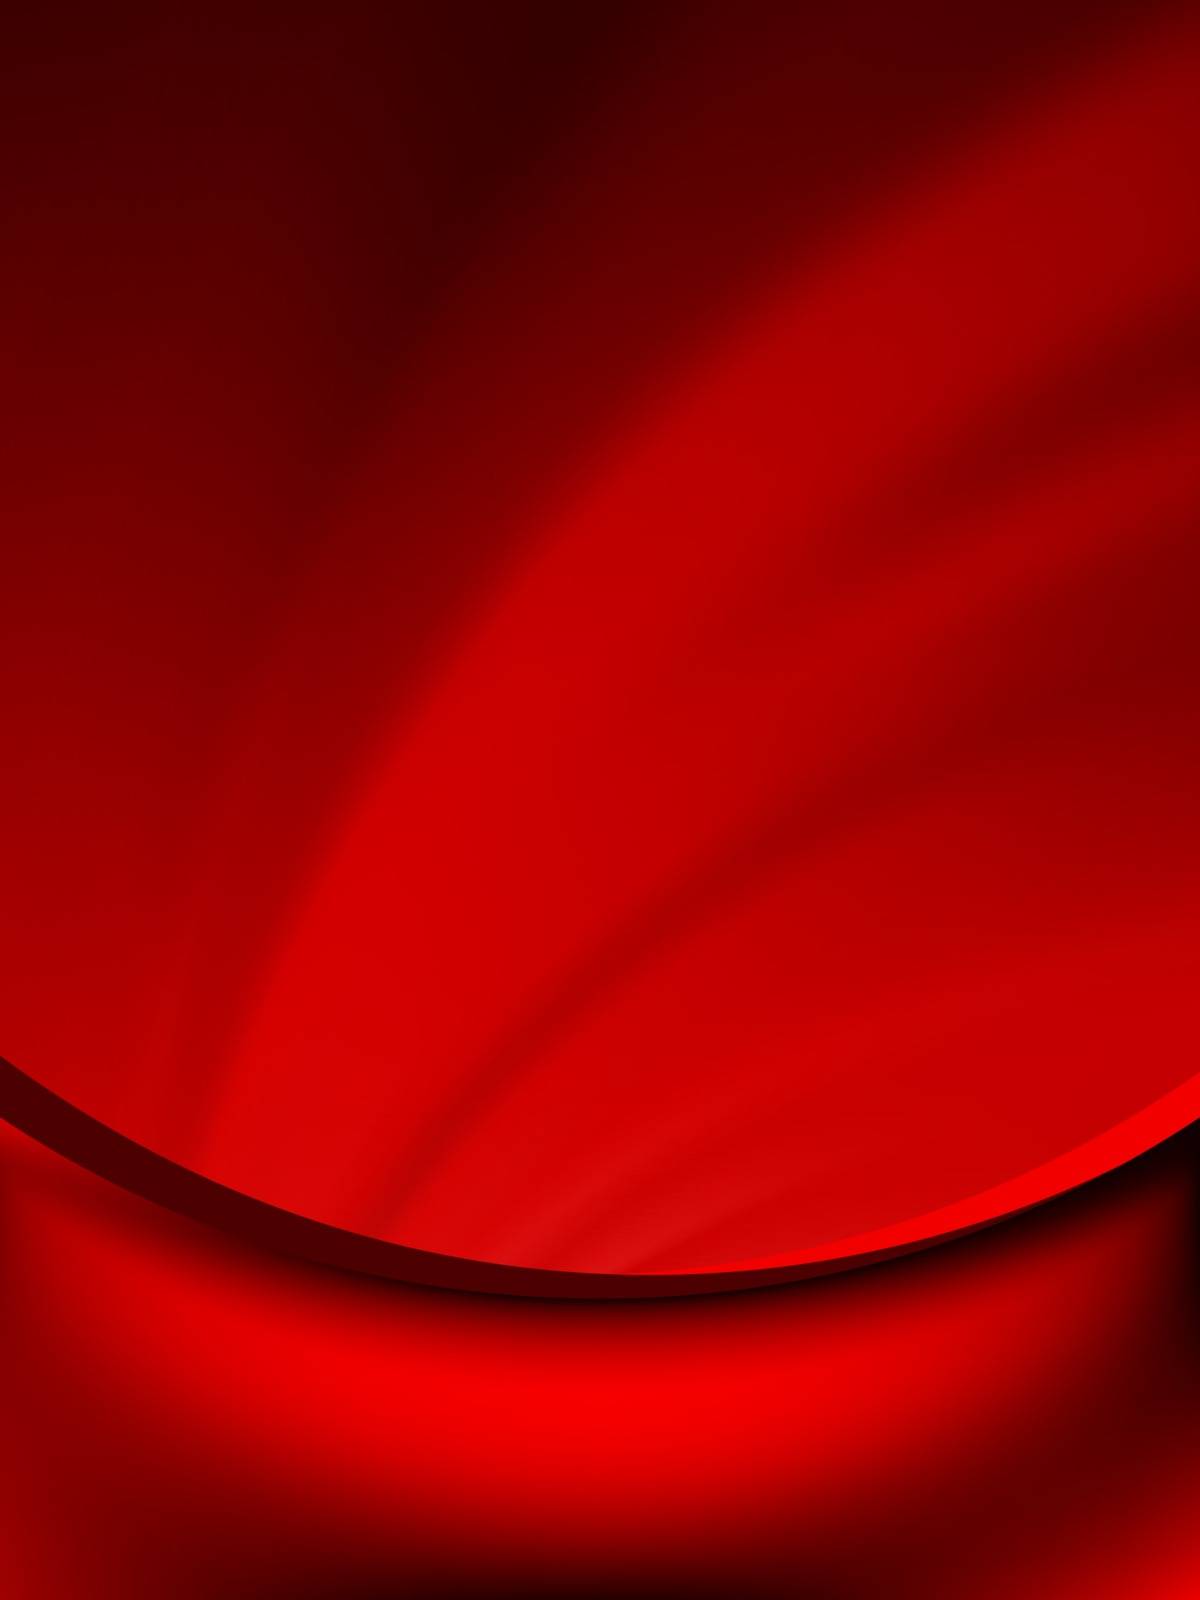 Red curtain fade to dark card. EPS 10 by Petrov_Vladimir